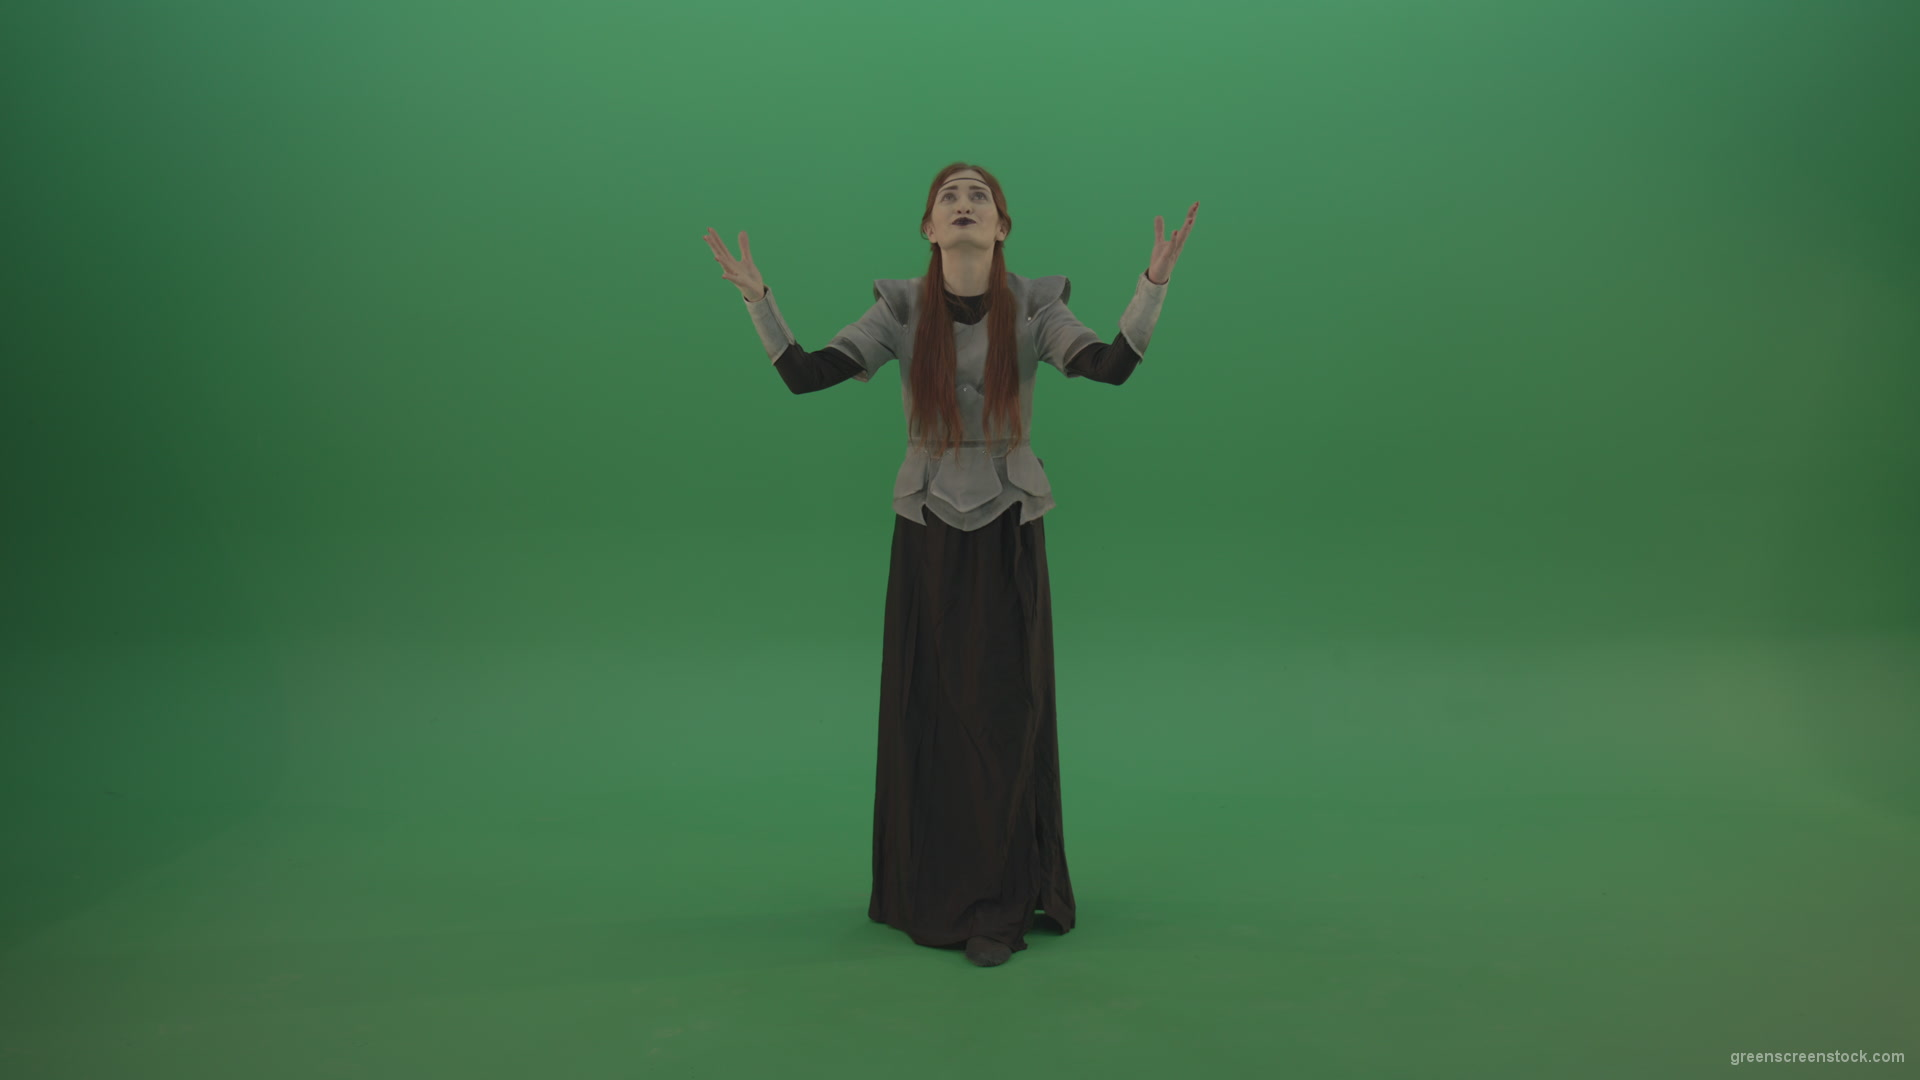 Redheaded-girl-in-full-height-in-medieval-warrior-clothing-asks-for-help-from-the-gods-on-green-screen_006 Green Screen Stock